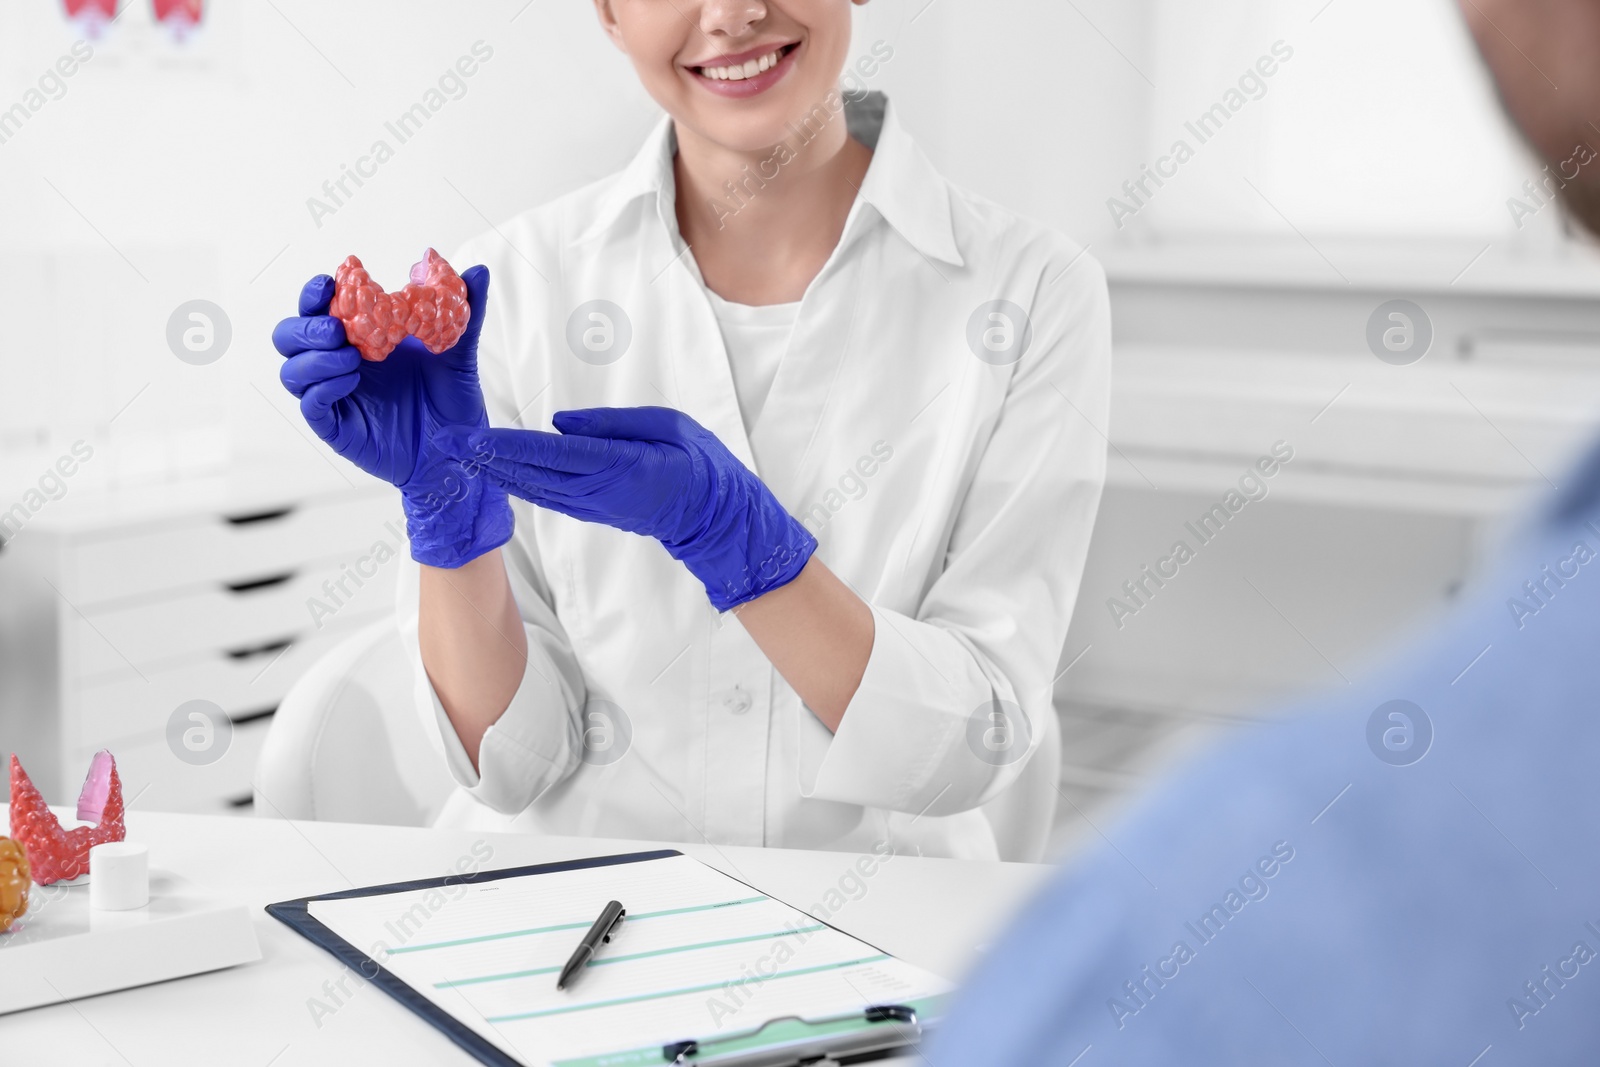 Photo of Endocrinologist showing thyroid gland model to patient at table in hospital, closeup